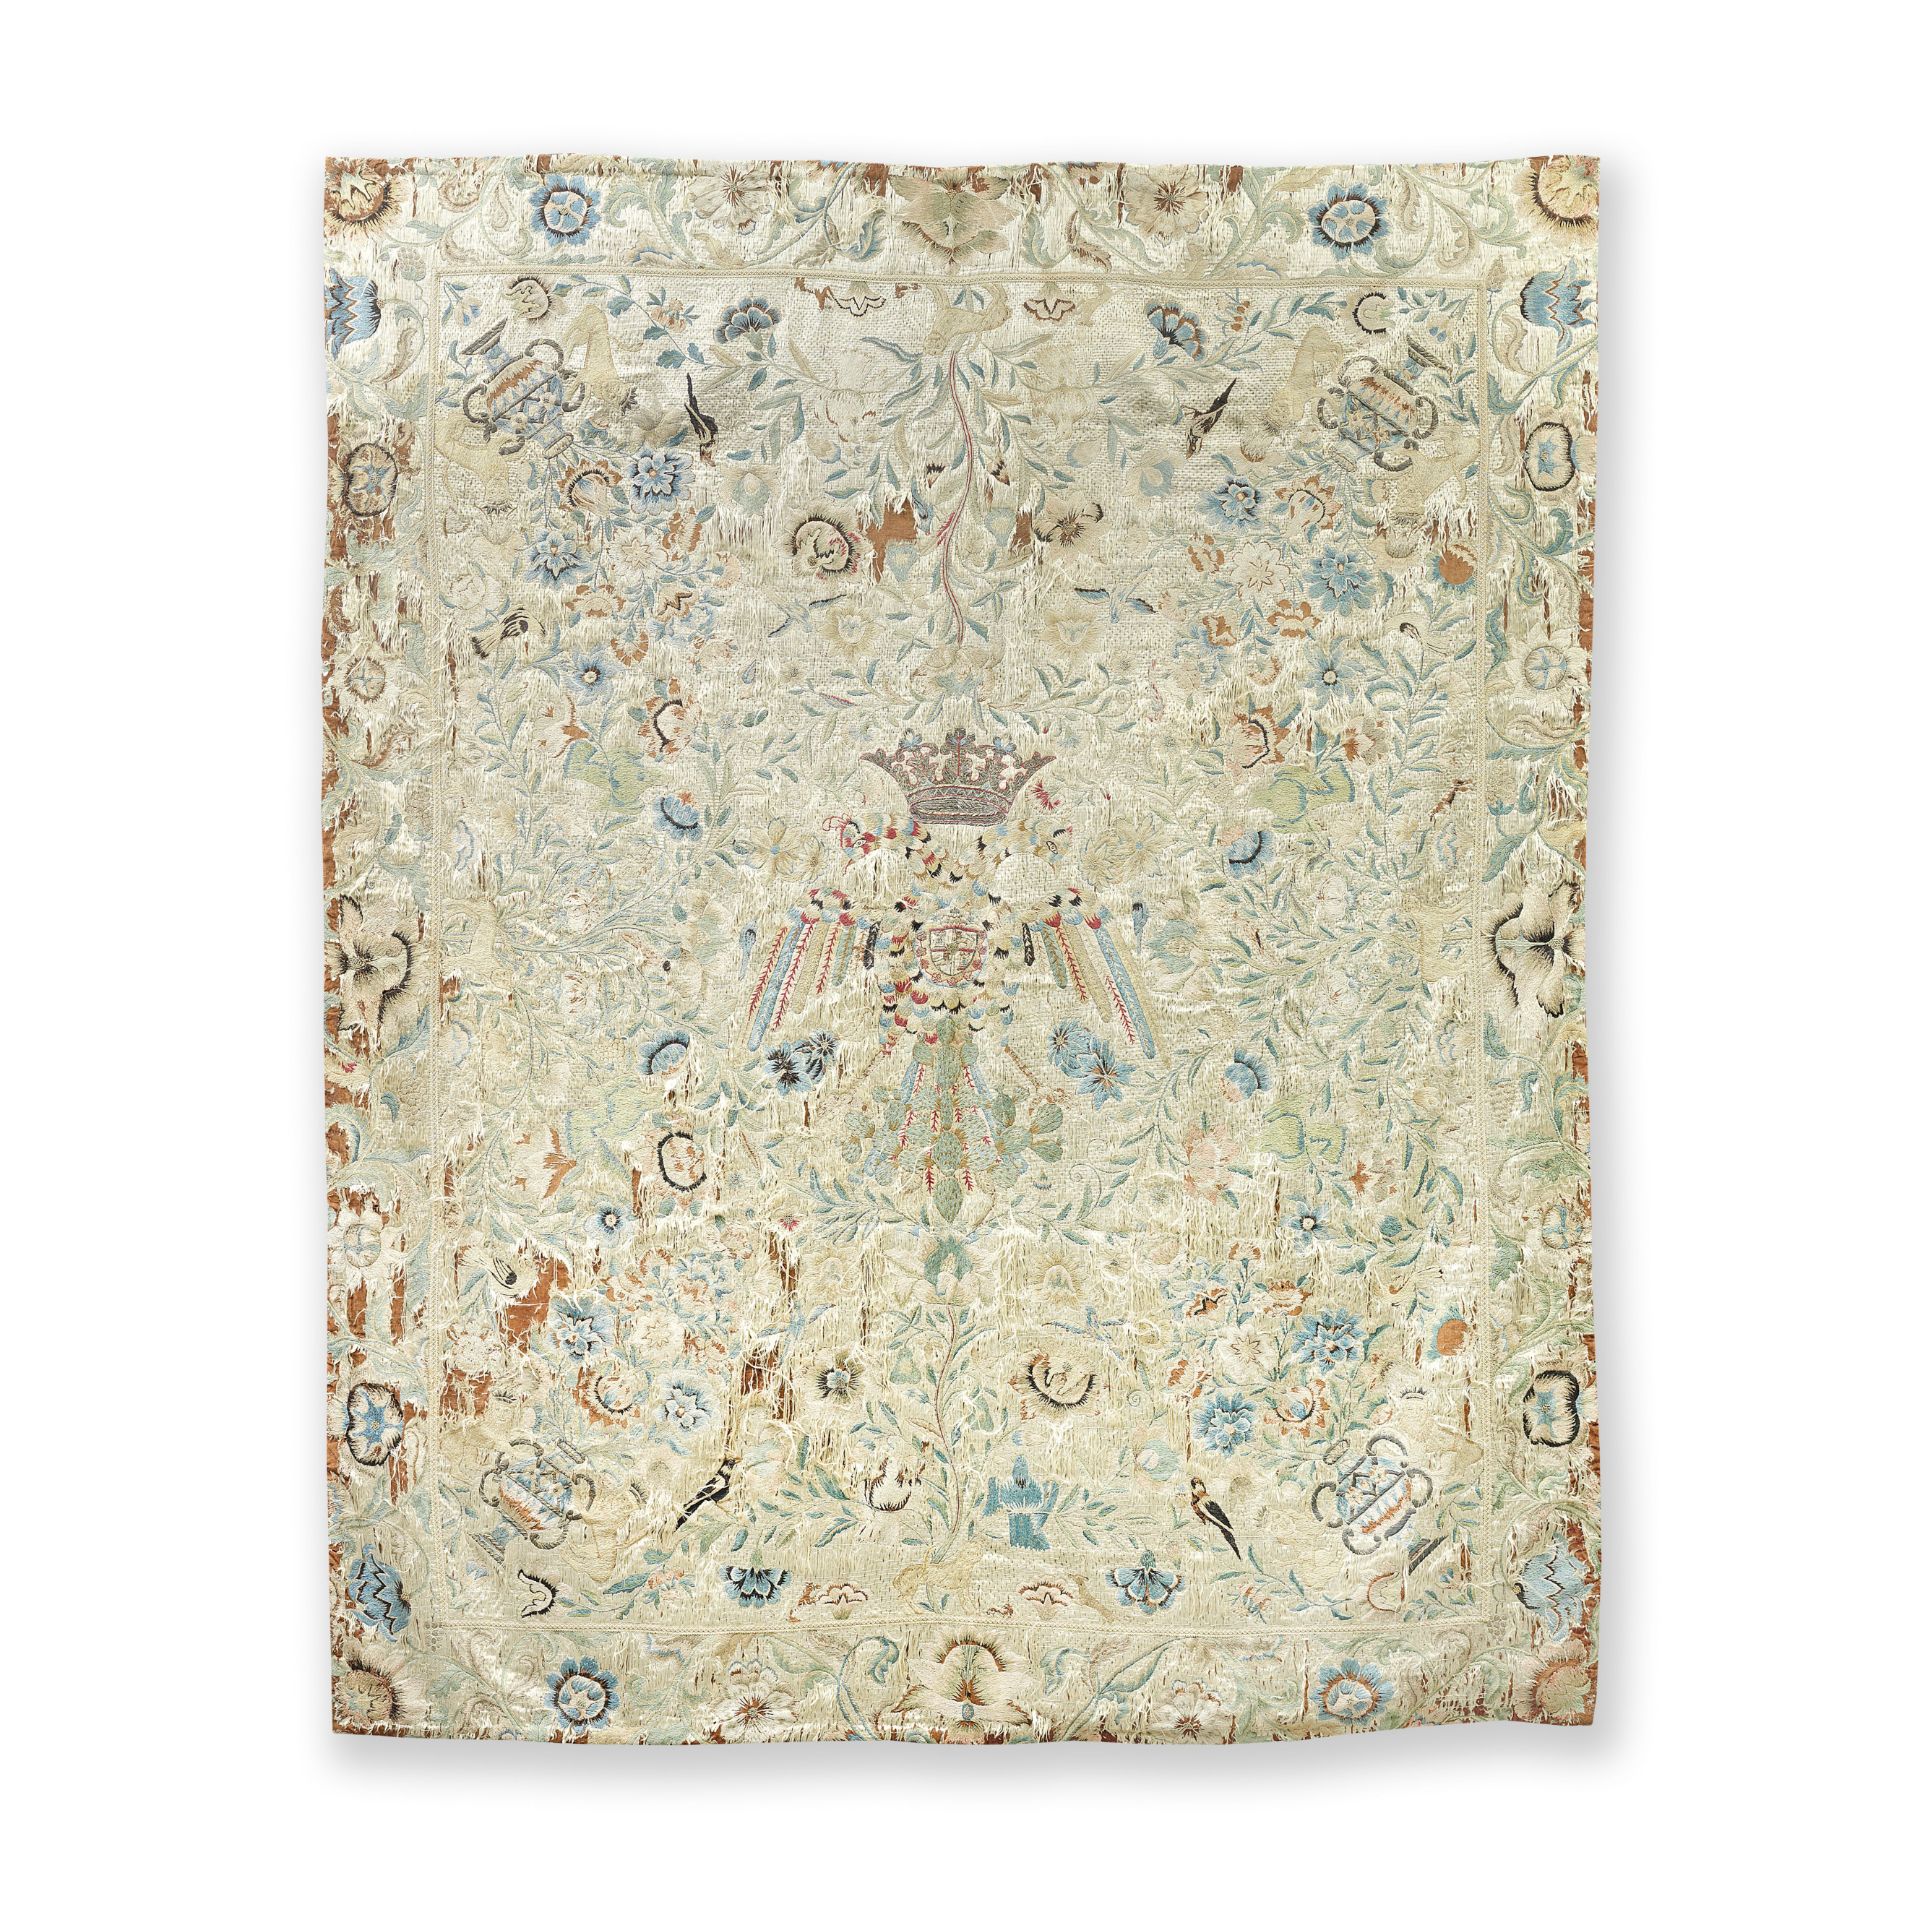 Of Royal Interest: An unusual Heraldic Embroidered Coverlet possibly early to mid 18th century, ...